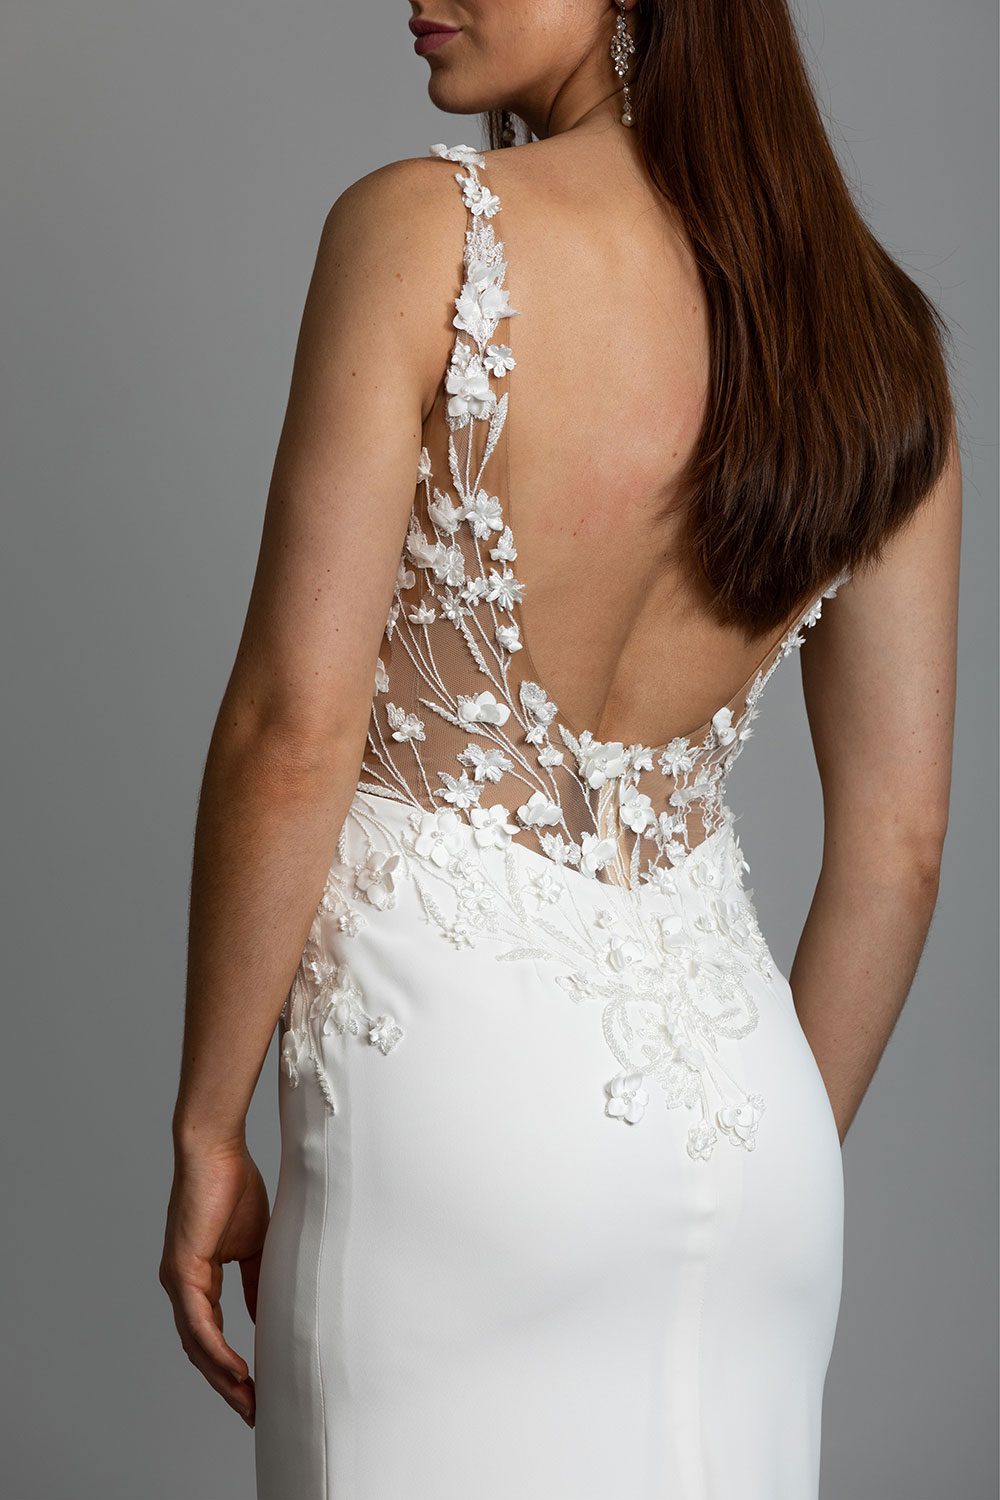 Reina Wedding Dress from Vinka Design. The front detail of a three-dimensional beaded flower lace gown on a nude base with a kimono over-dress and slim fitting floor length skirt. Close up of back of the dress with sheer illusion low back with 3D floral lace embroidery